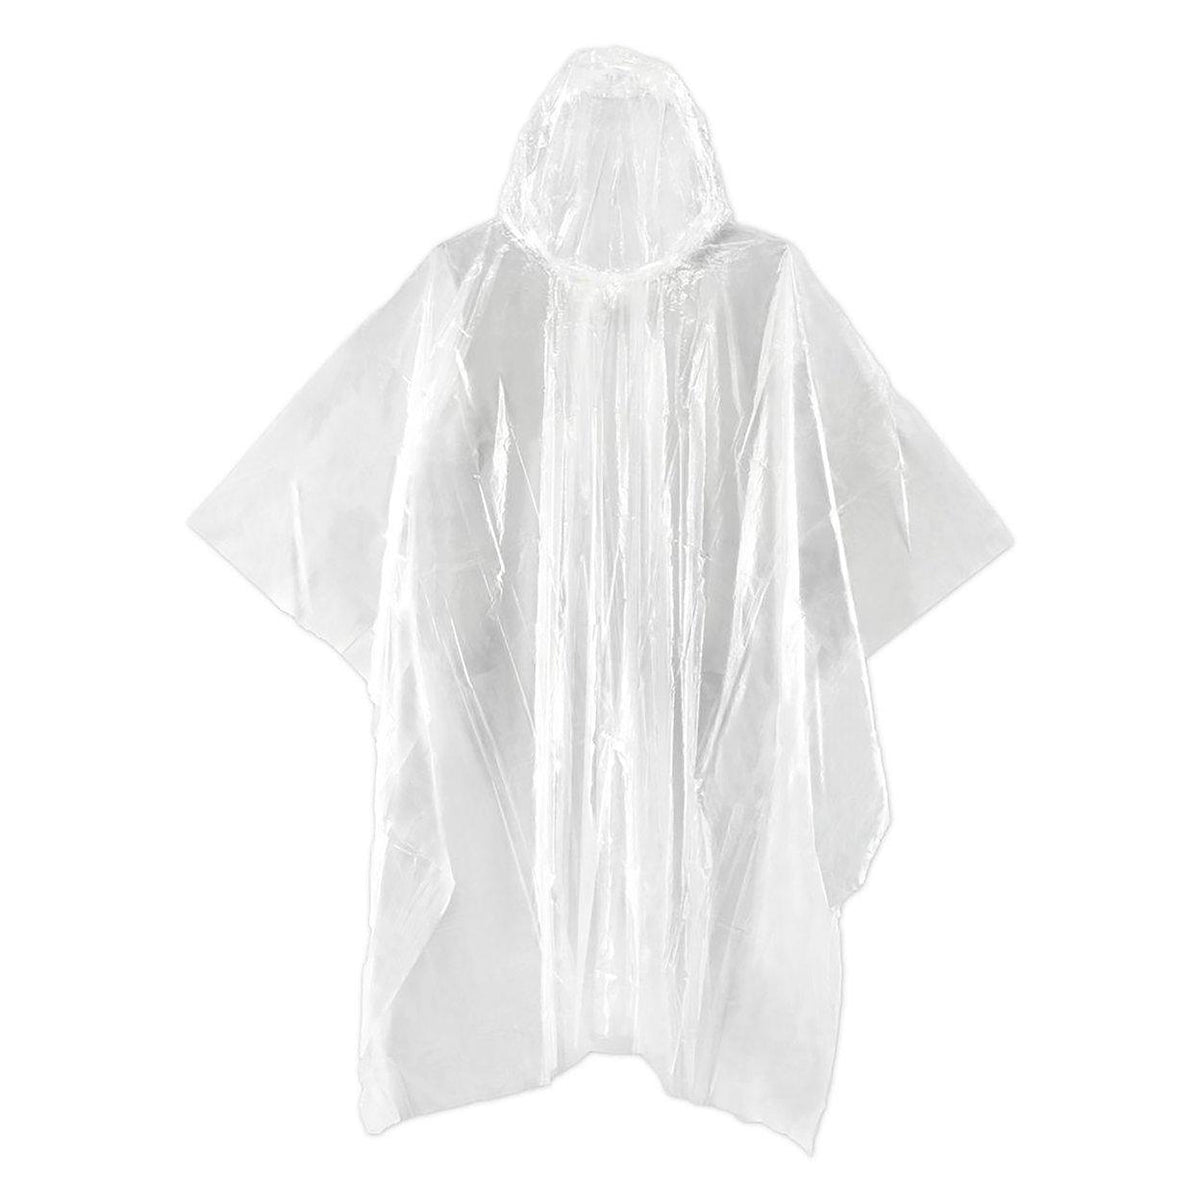 Front view of the Rain Poncho-Cyclist unfolded.